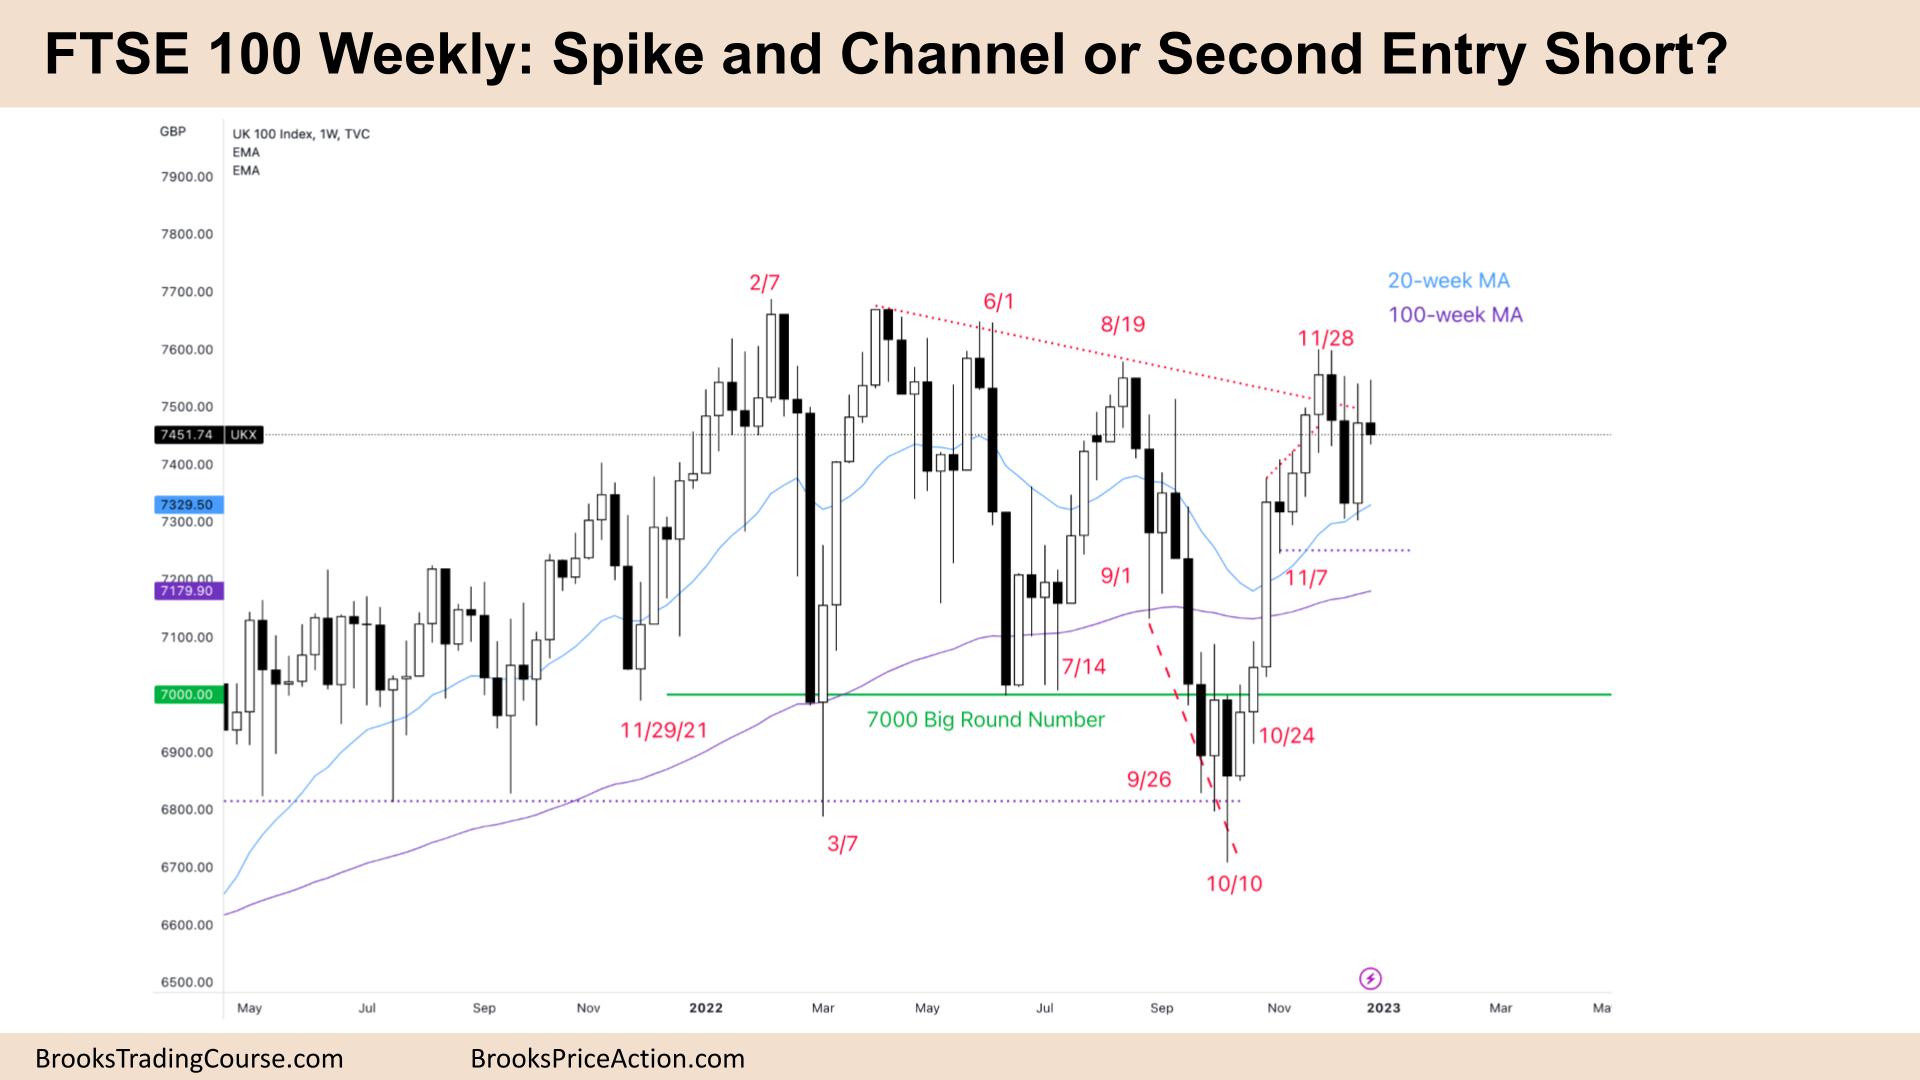 FTSE 100 Spike and Channel or Second Entry Short